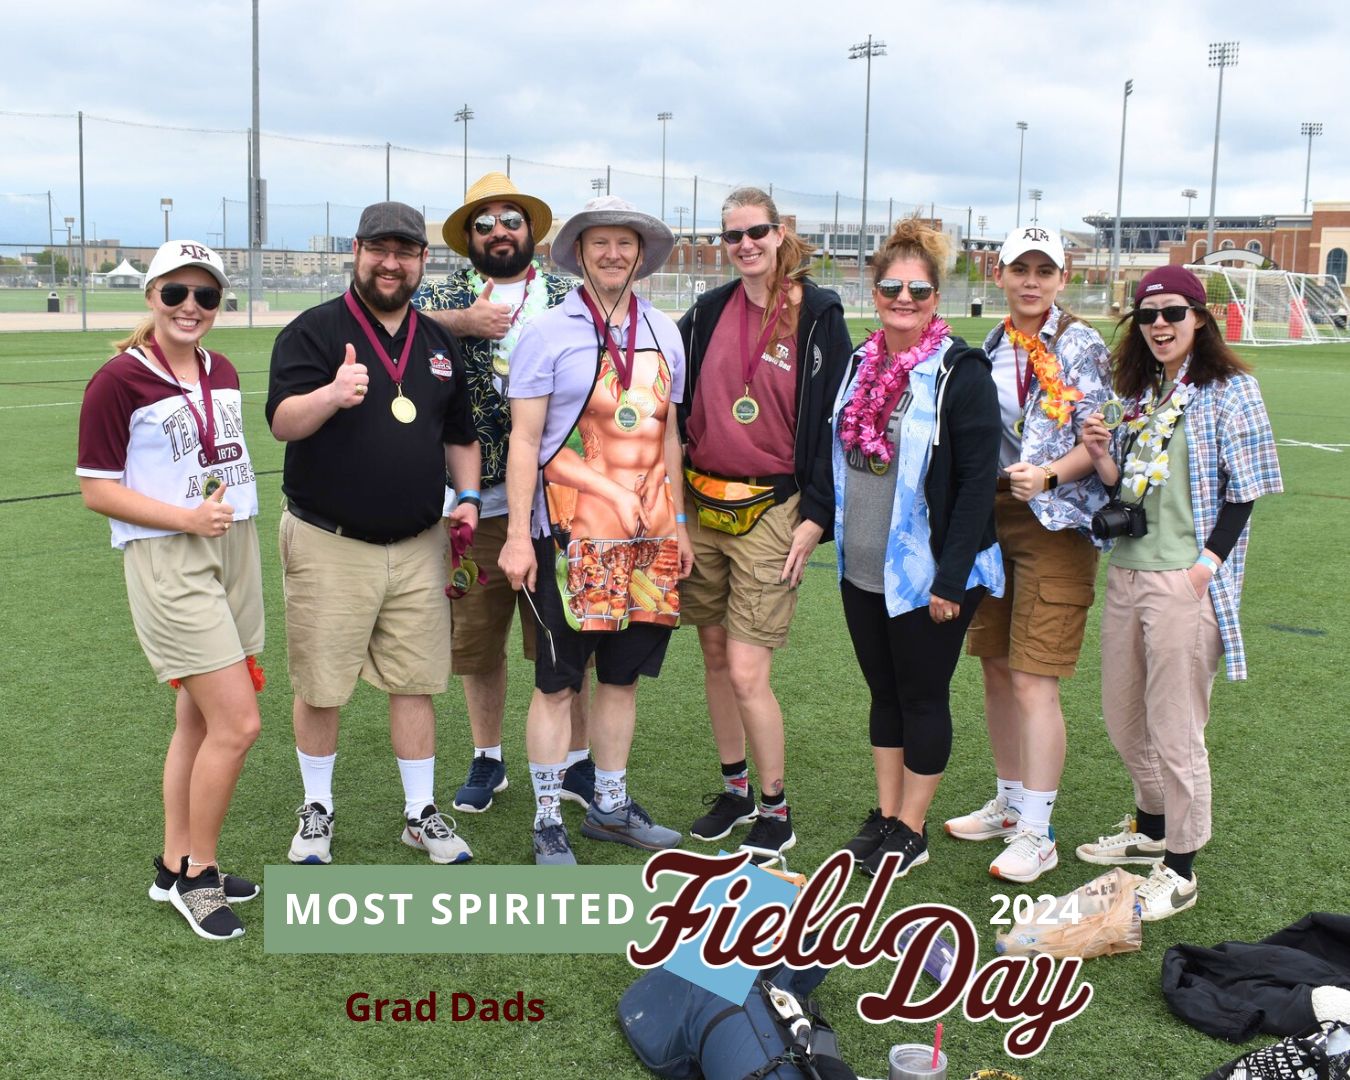 The Grad Dads  team posing at Field Day 2024